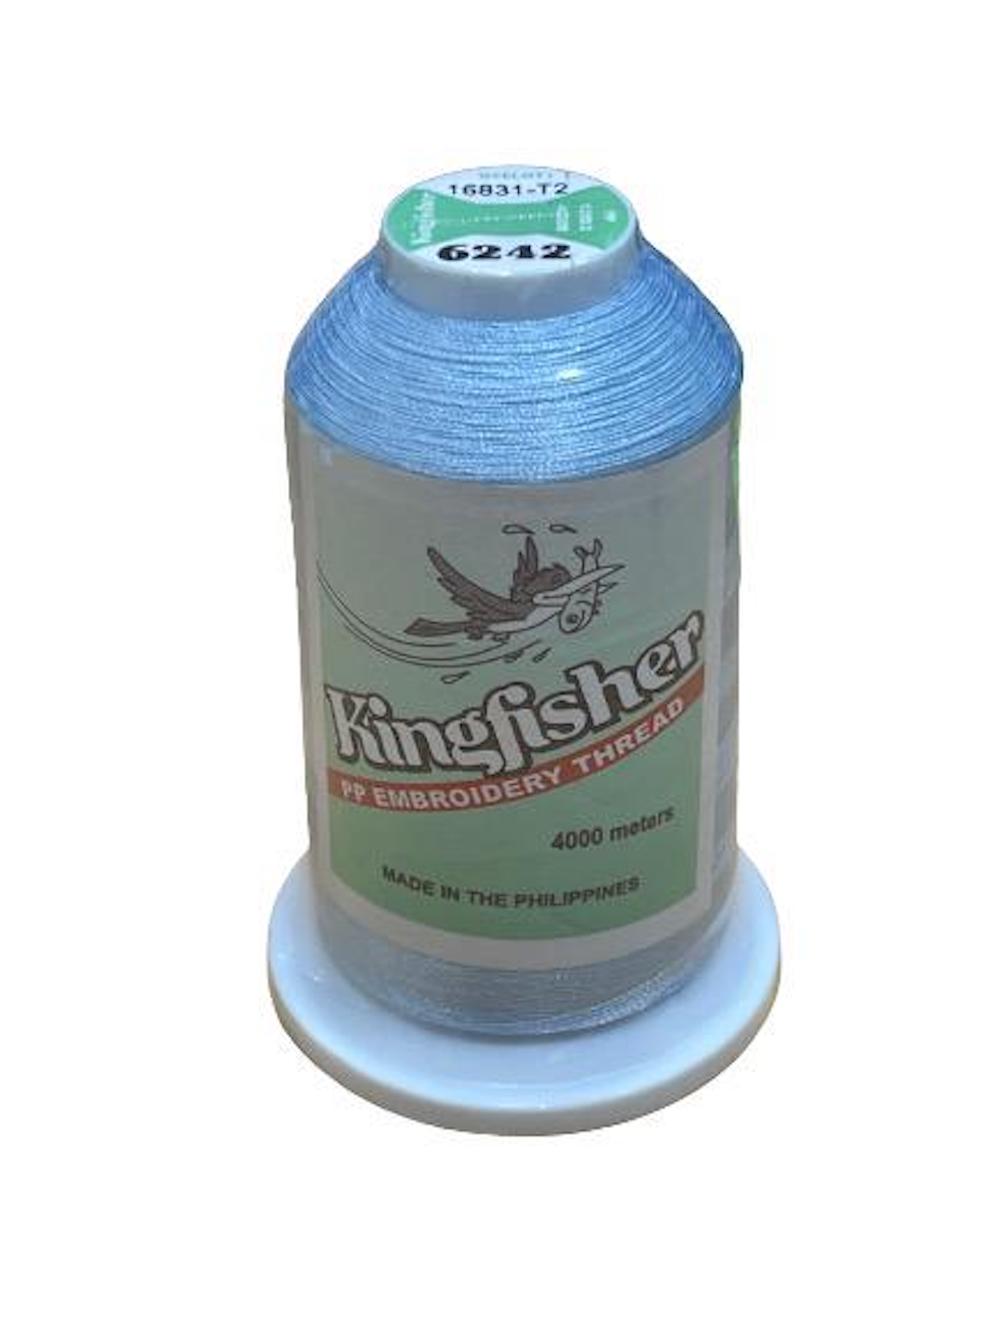 King Fisher Embroidery Thread 4000m 6242 - MY SEWING MALL